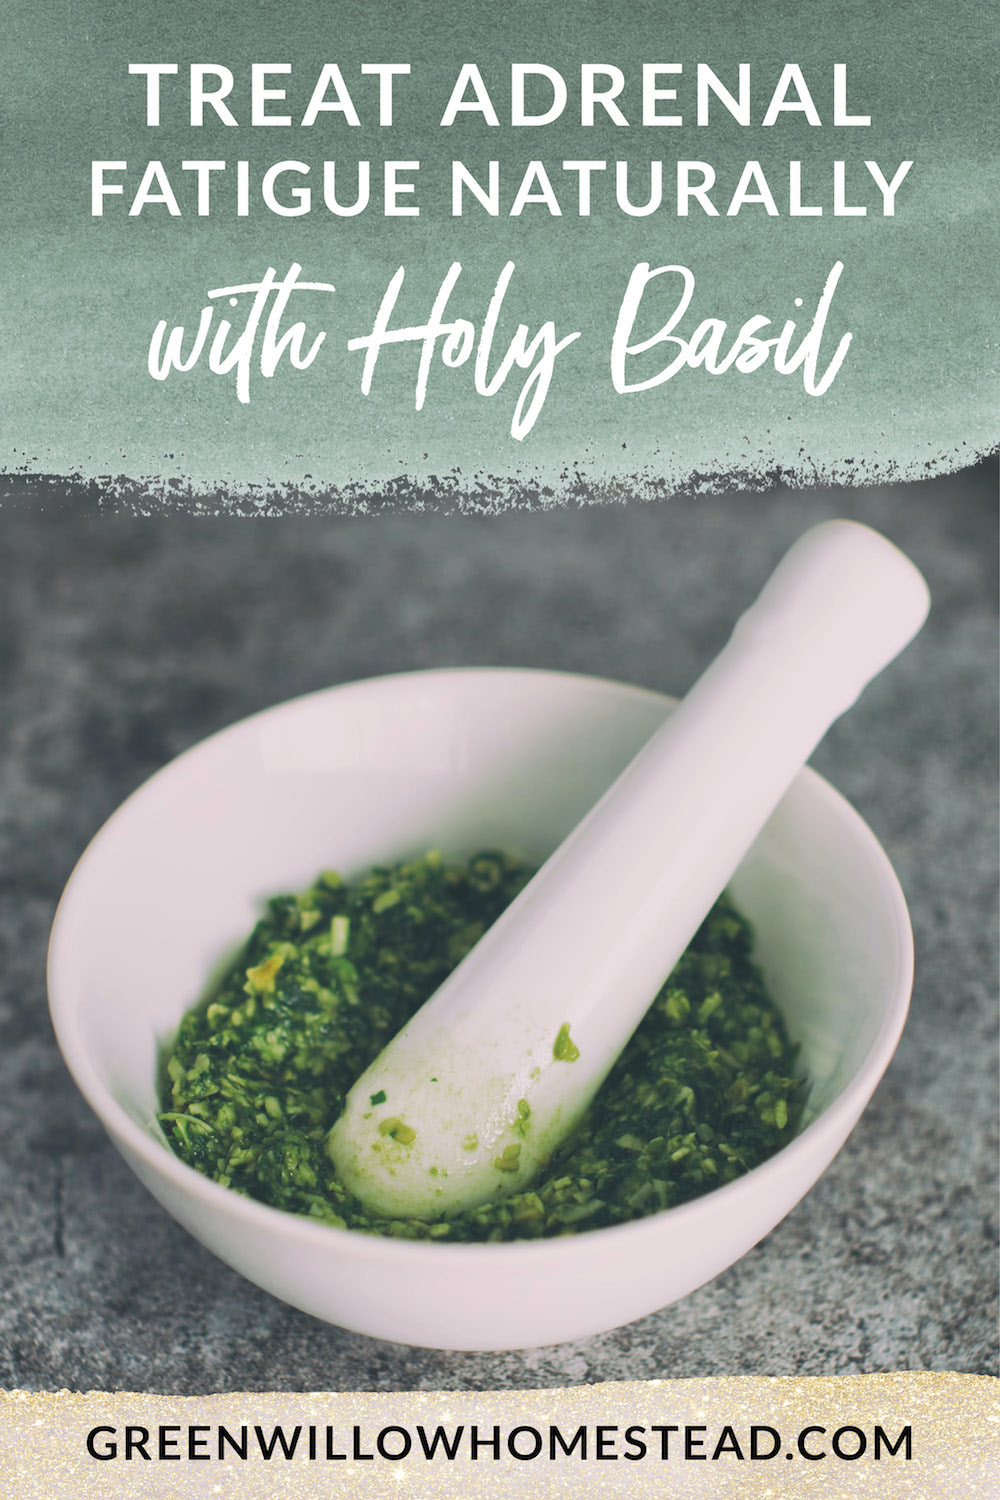 Treating Adrenal Fatigue Naturally with Holy Basil